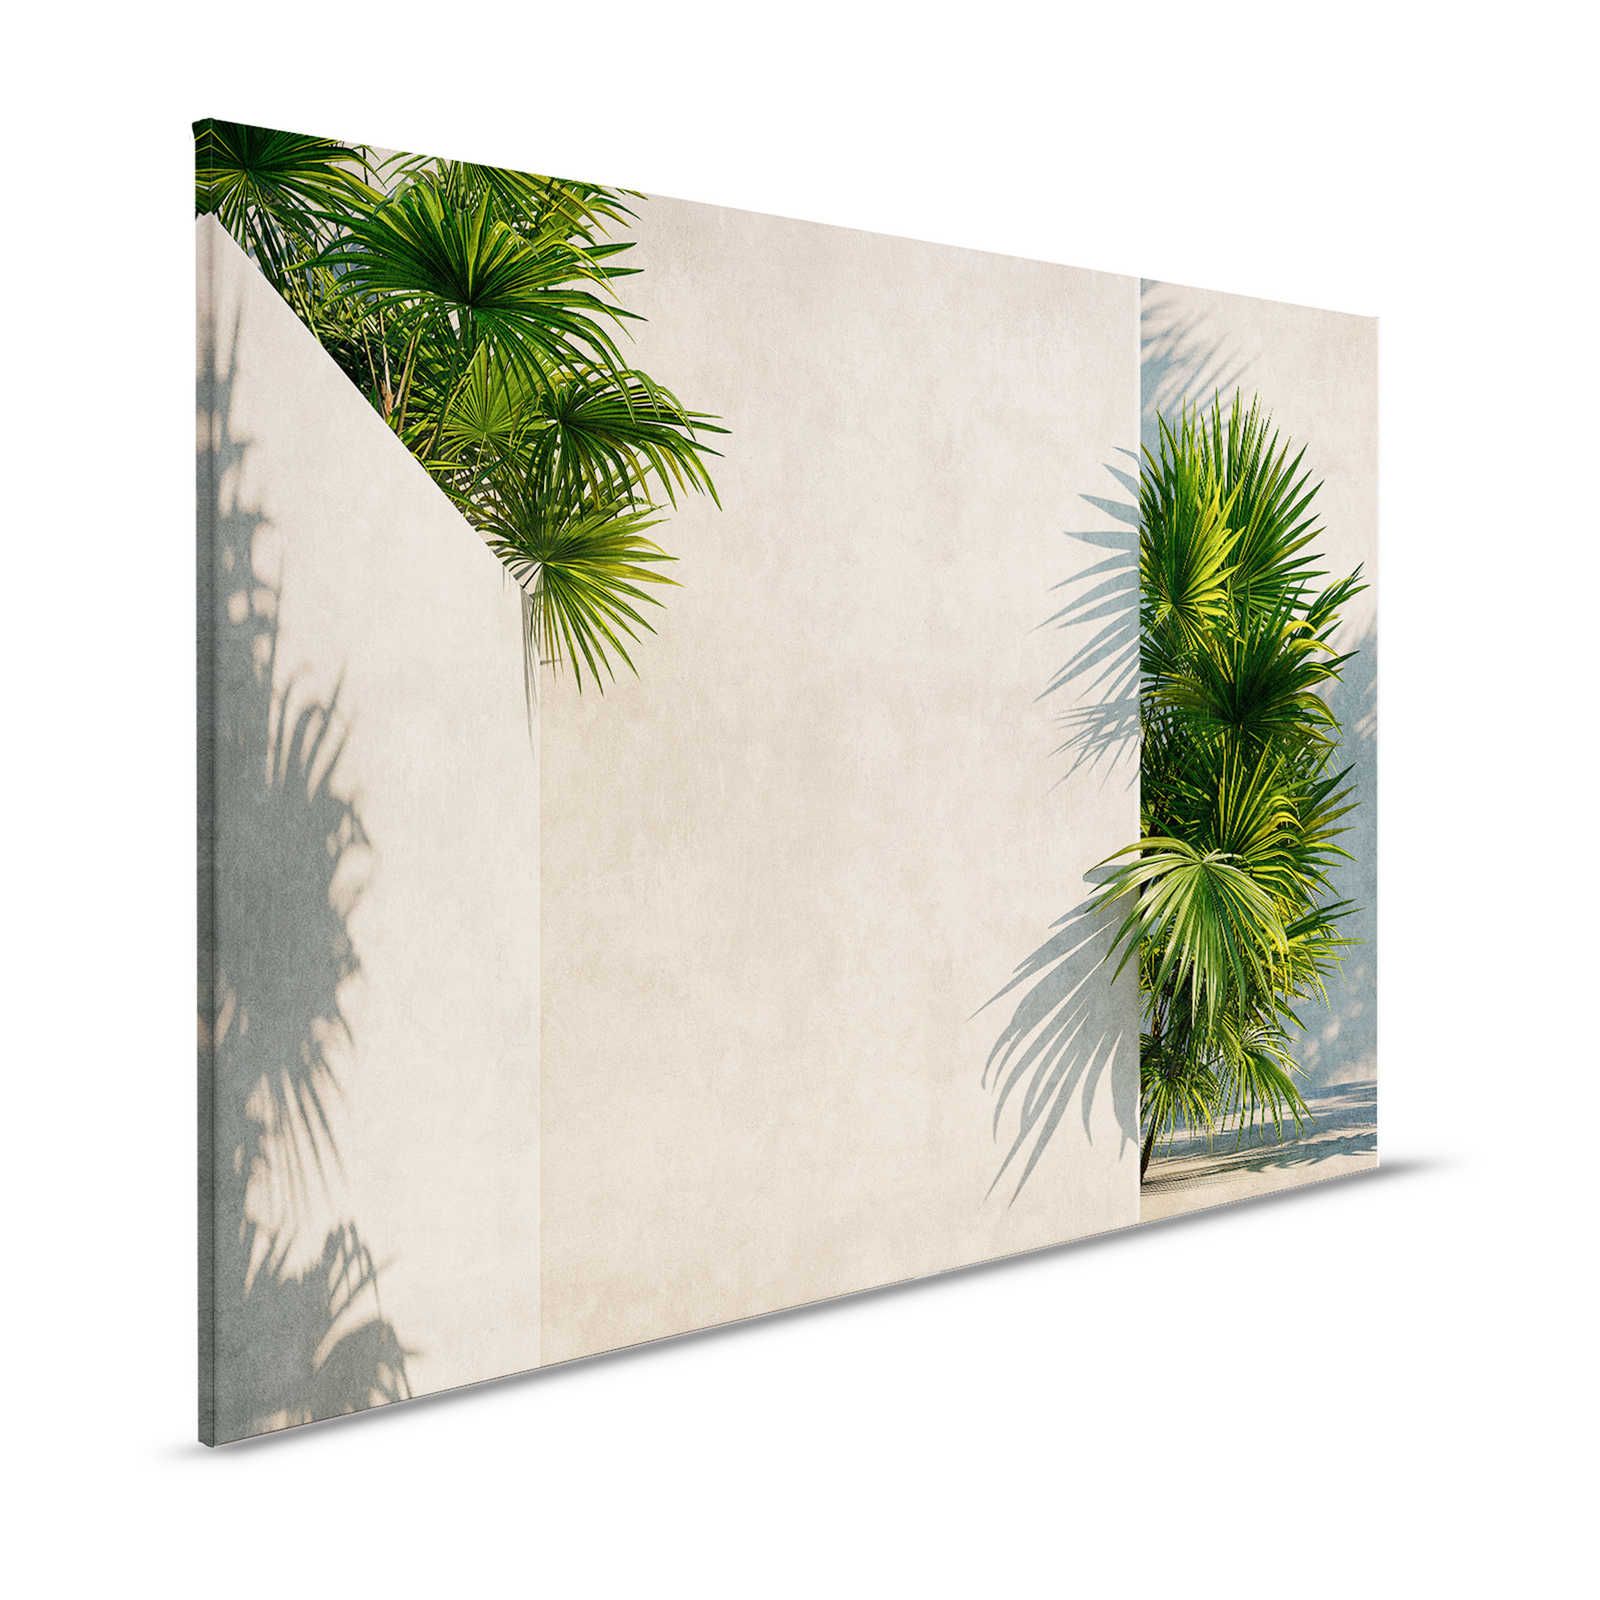 Tunis 1 - Canvas painting Palm trees in courtyard with plaster walls - 1.20 m x 0.80 m
